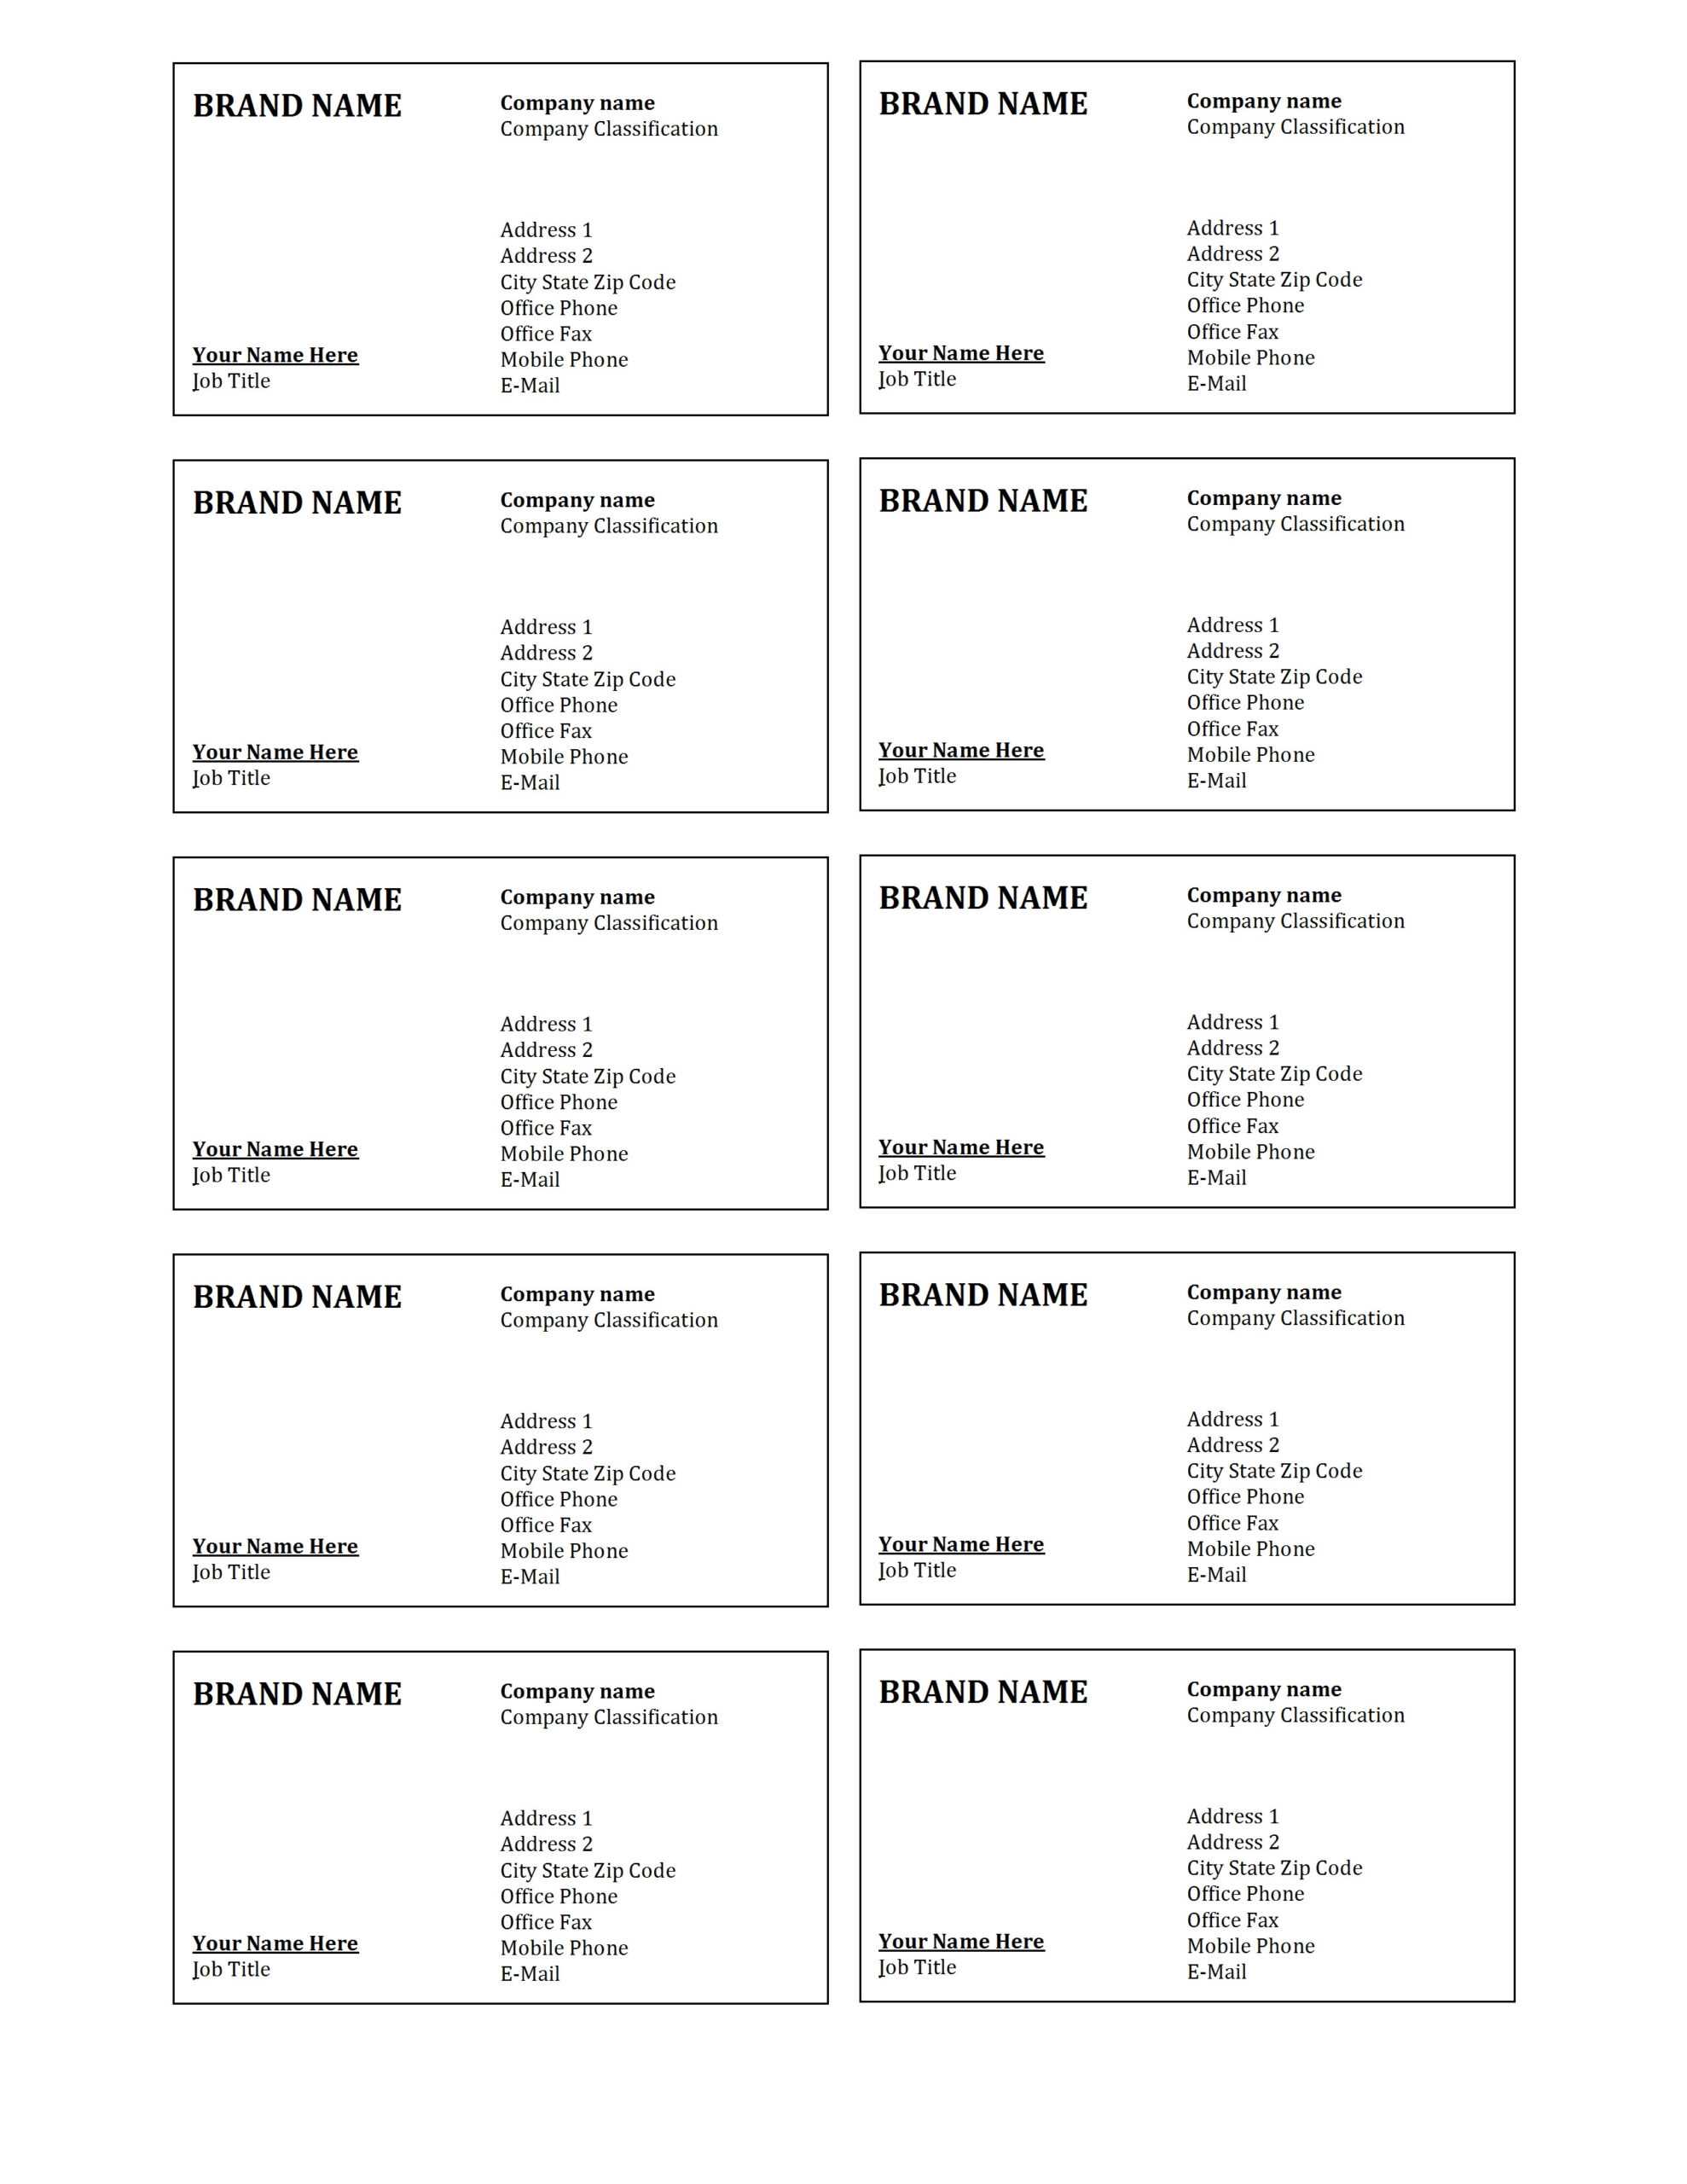 9 Visiting Card Sheet Templates | Fax Cover Sheet Examples With Regard To Plain Business Card Template Microsoft Word